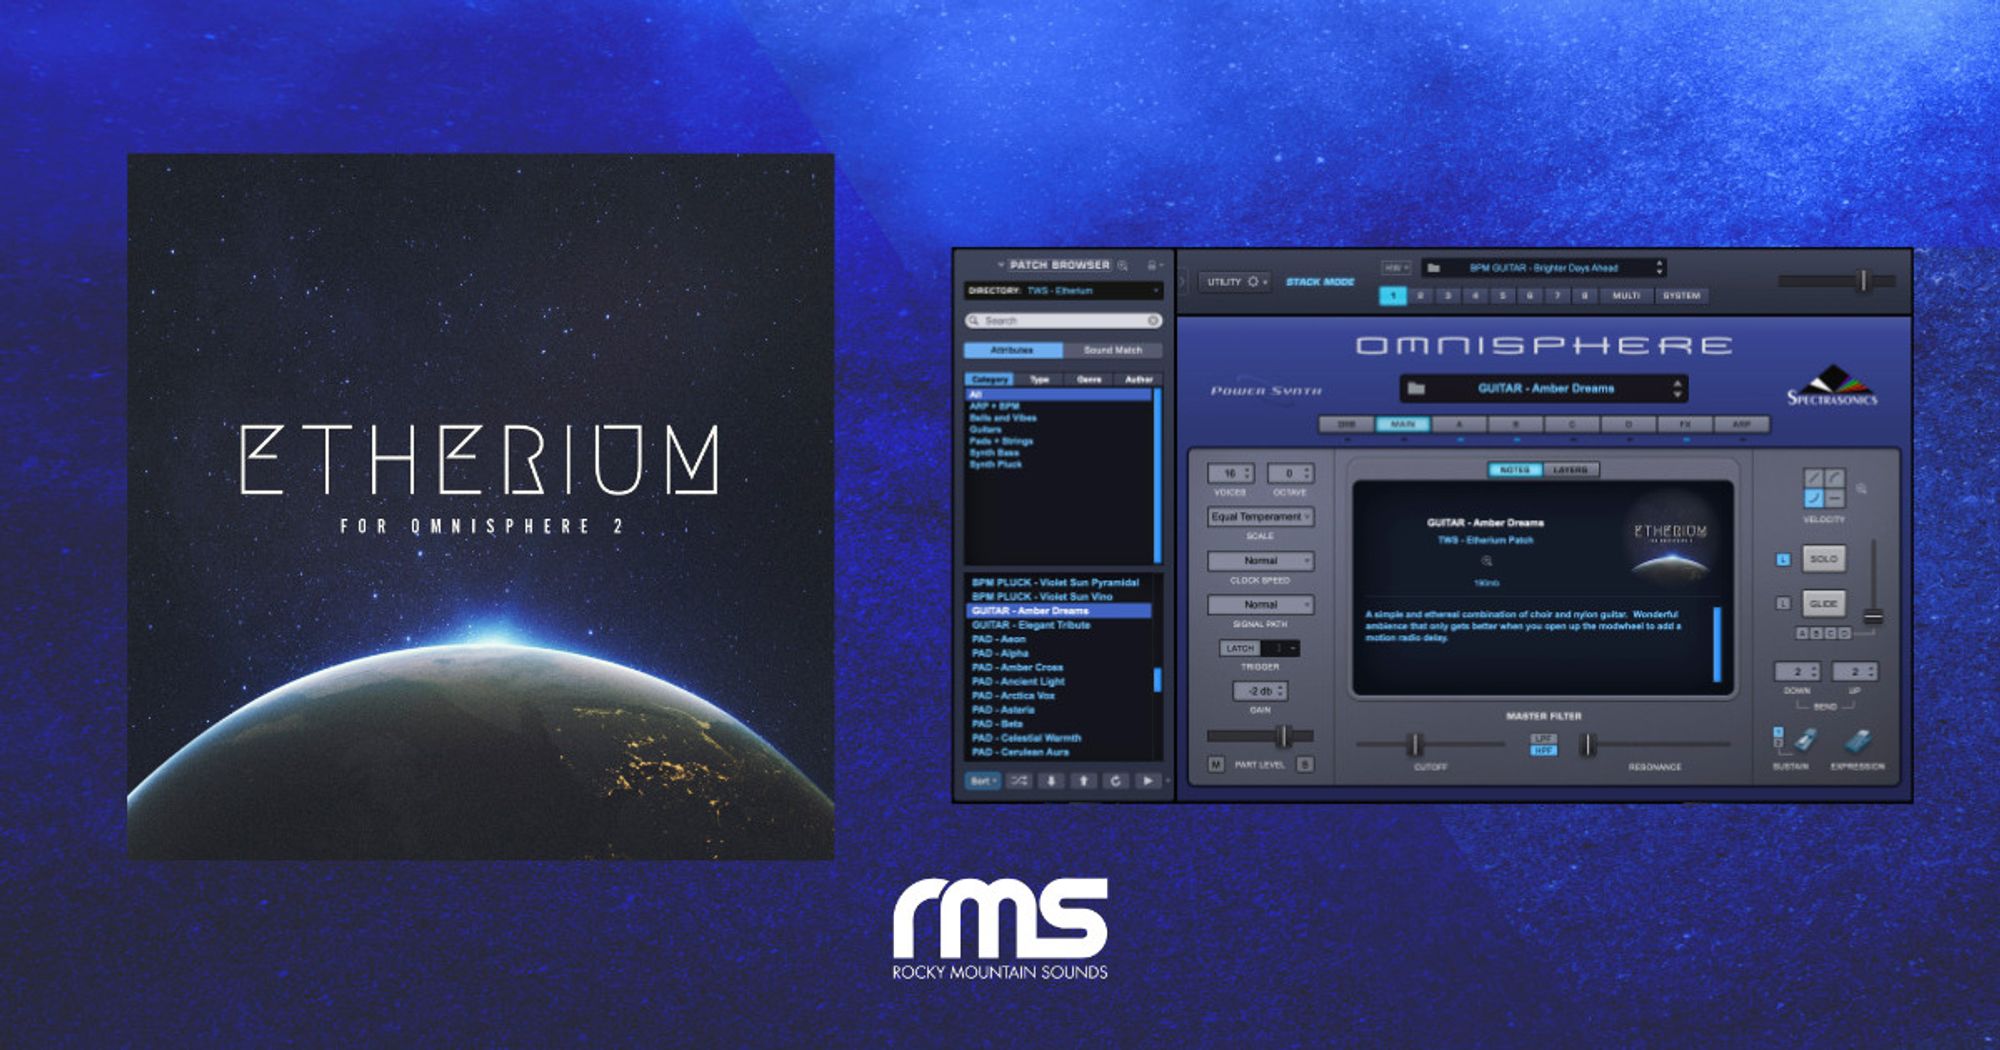 Etherium for Omnisphere 2 - Unify Enhanced | RockyMountainSounds